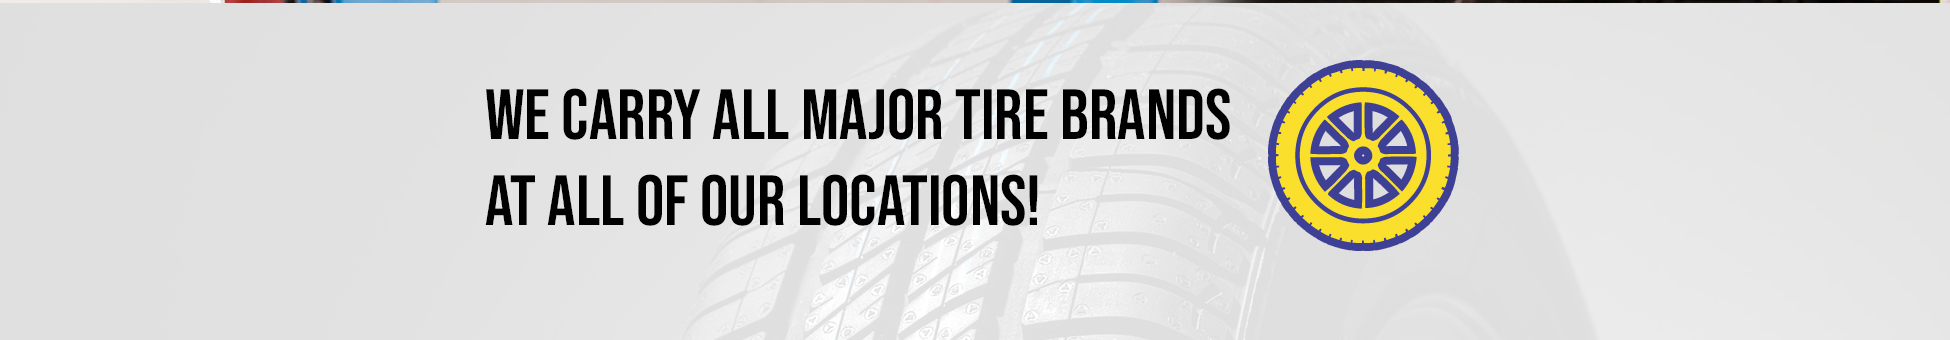 We carry industry leading tire brands such as Goodyear Tires